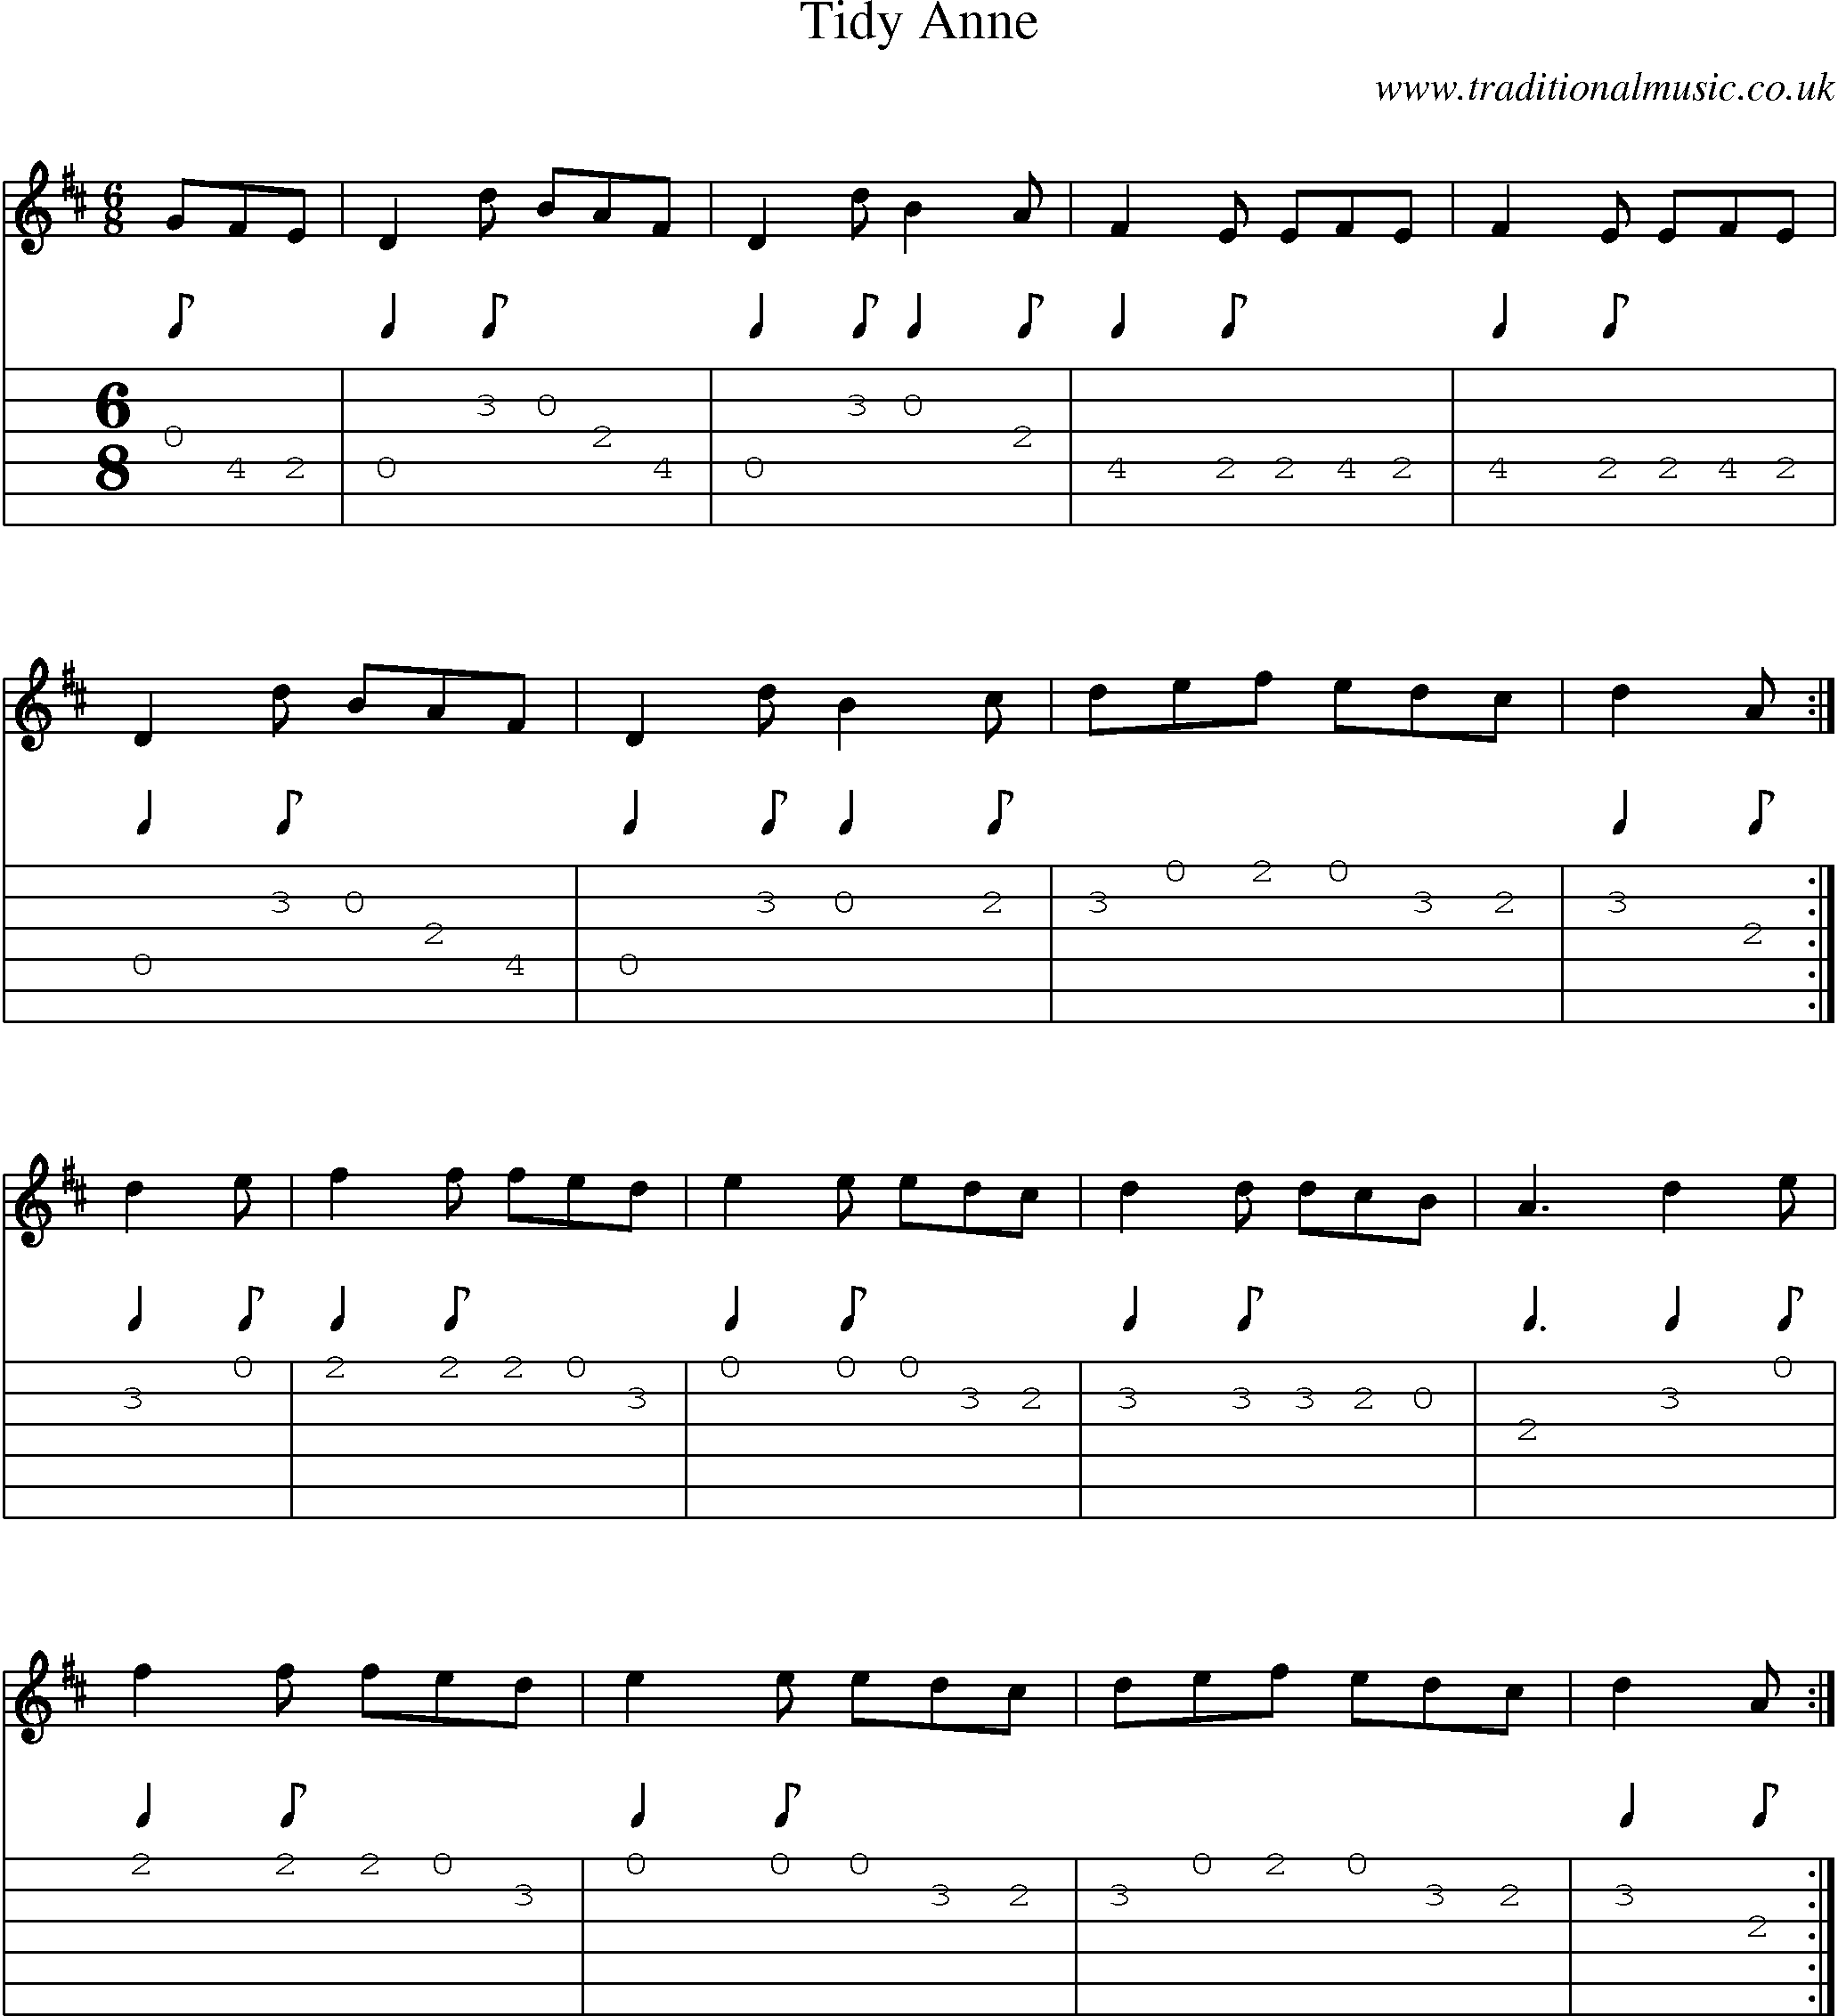 Music Score and Guitar Tabs for Tidy Anne